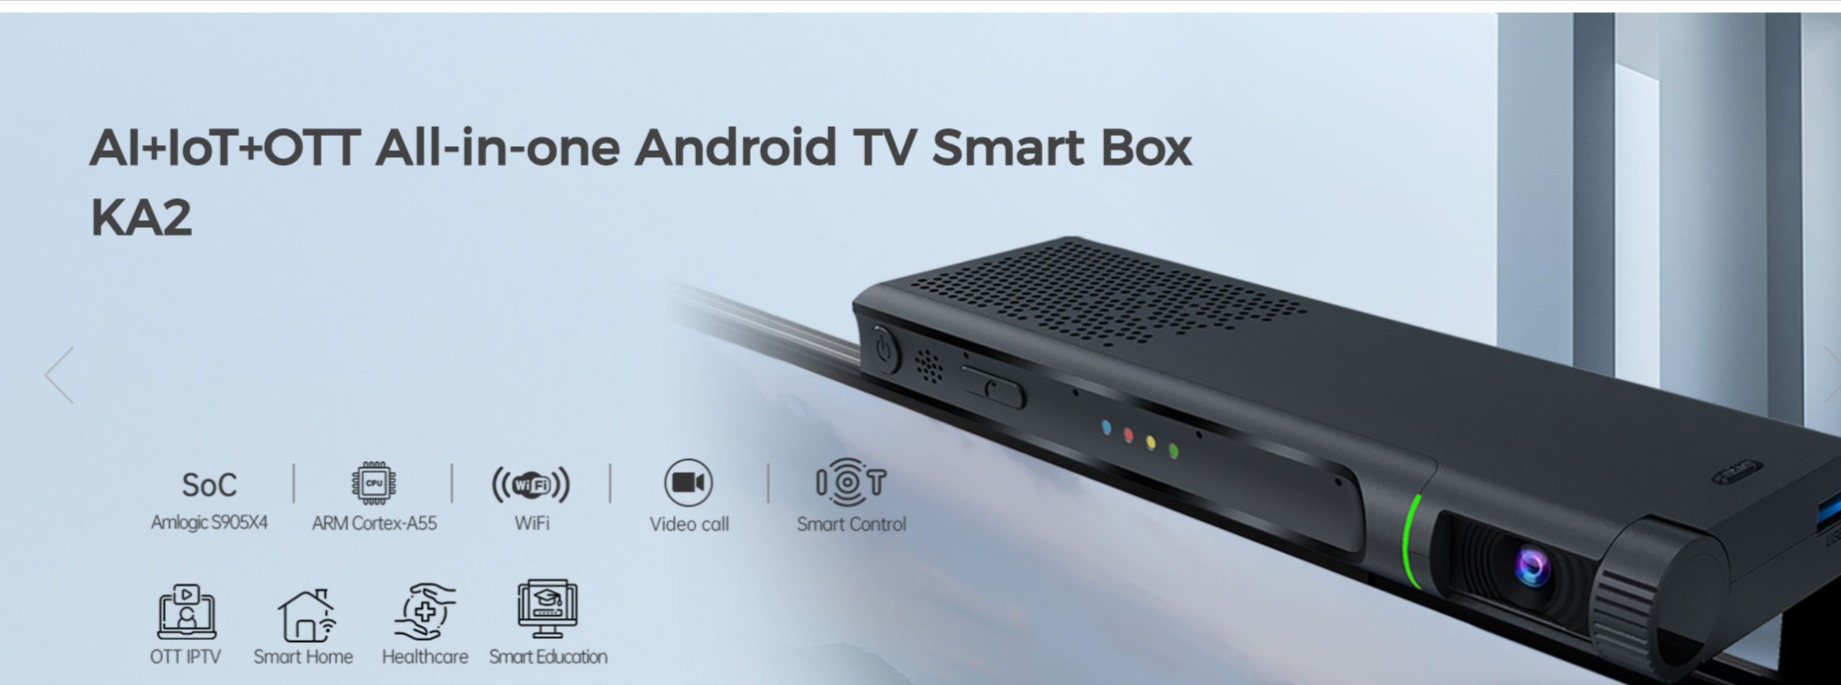 smart-tv-boxes-improving-home-entertainment-videostrong